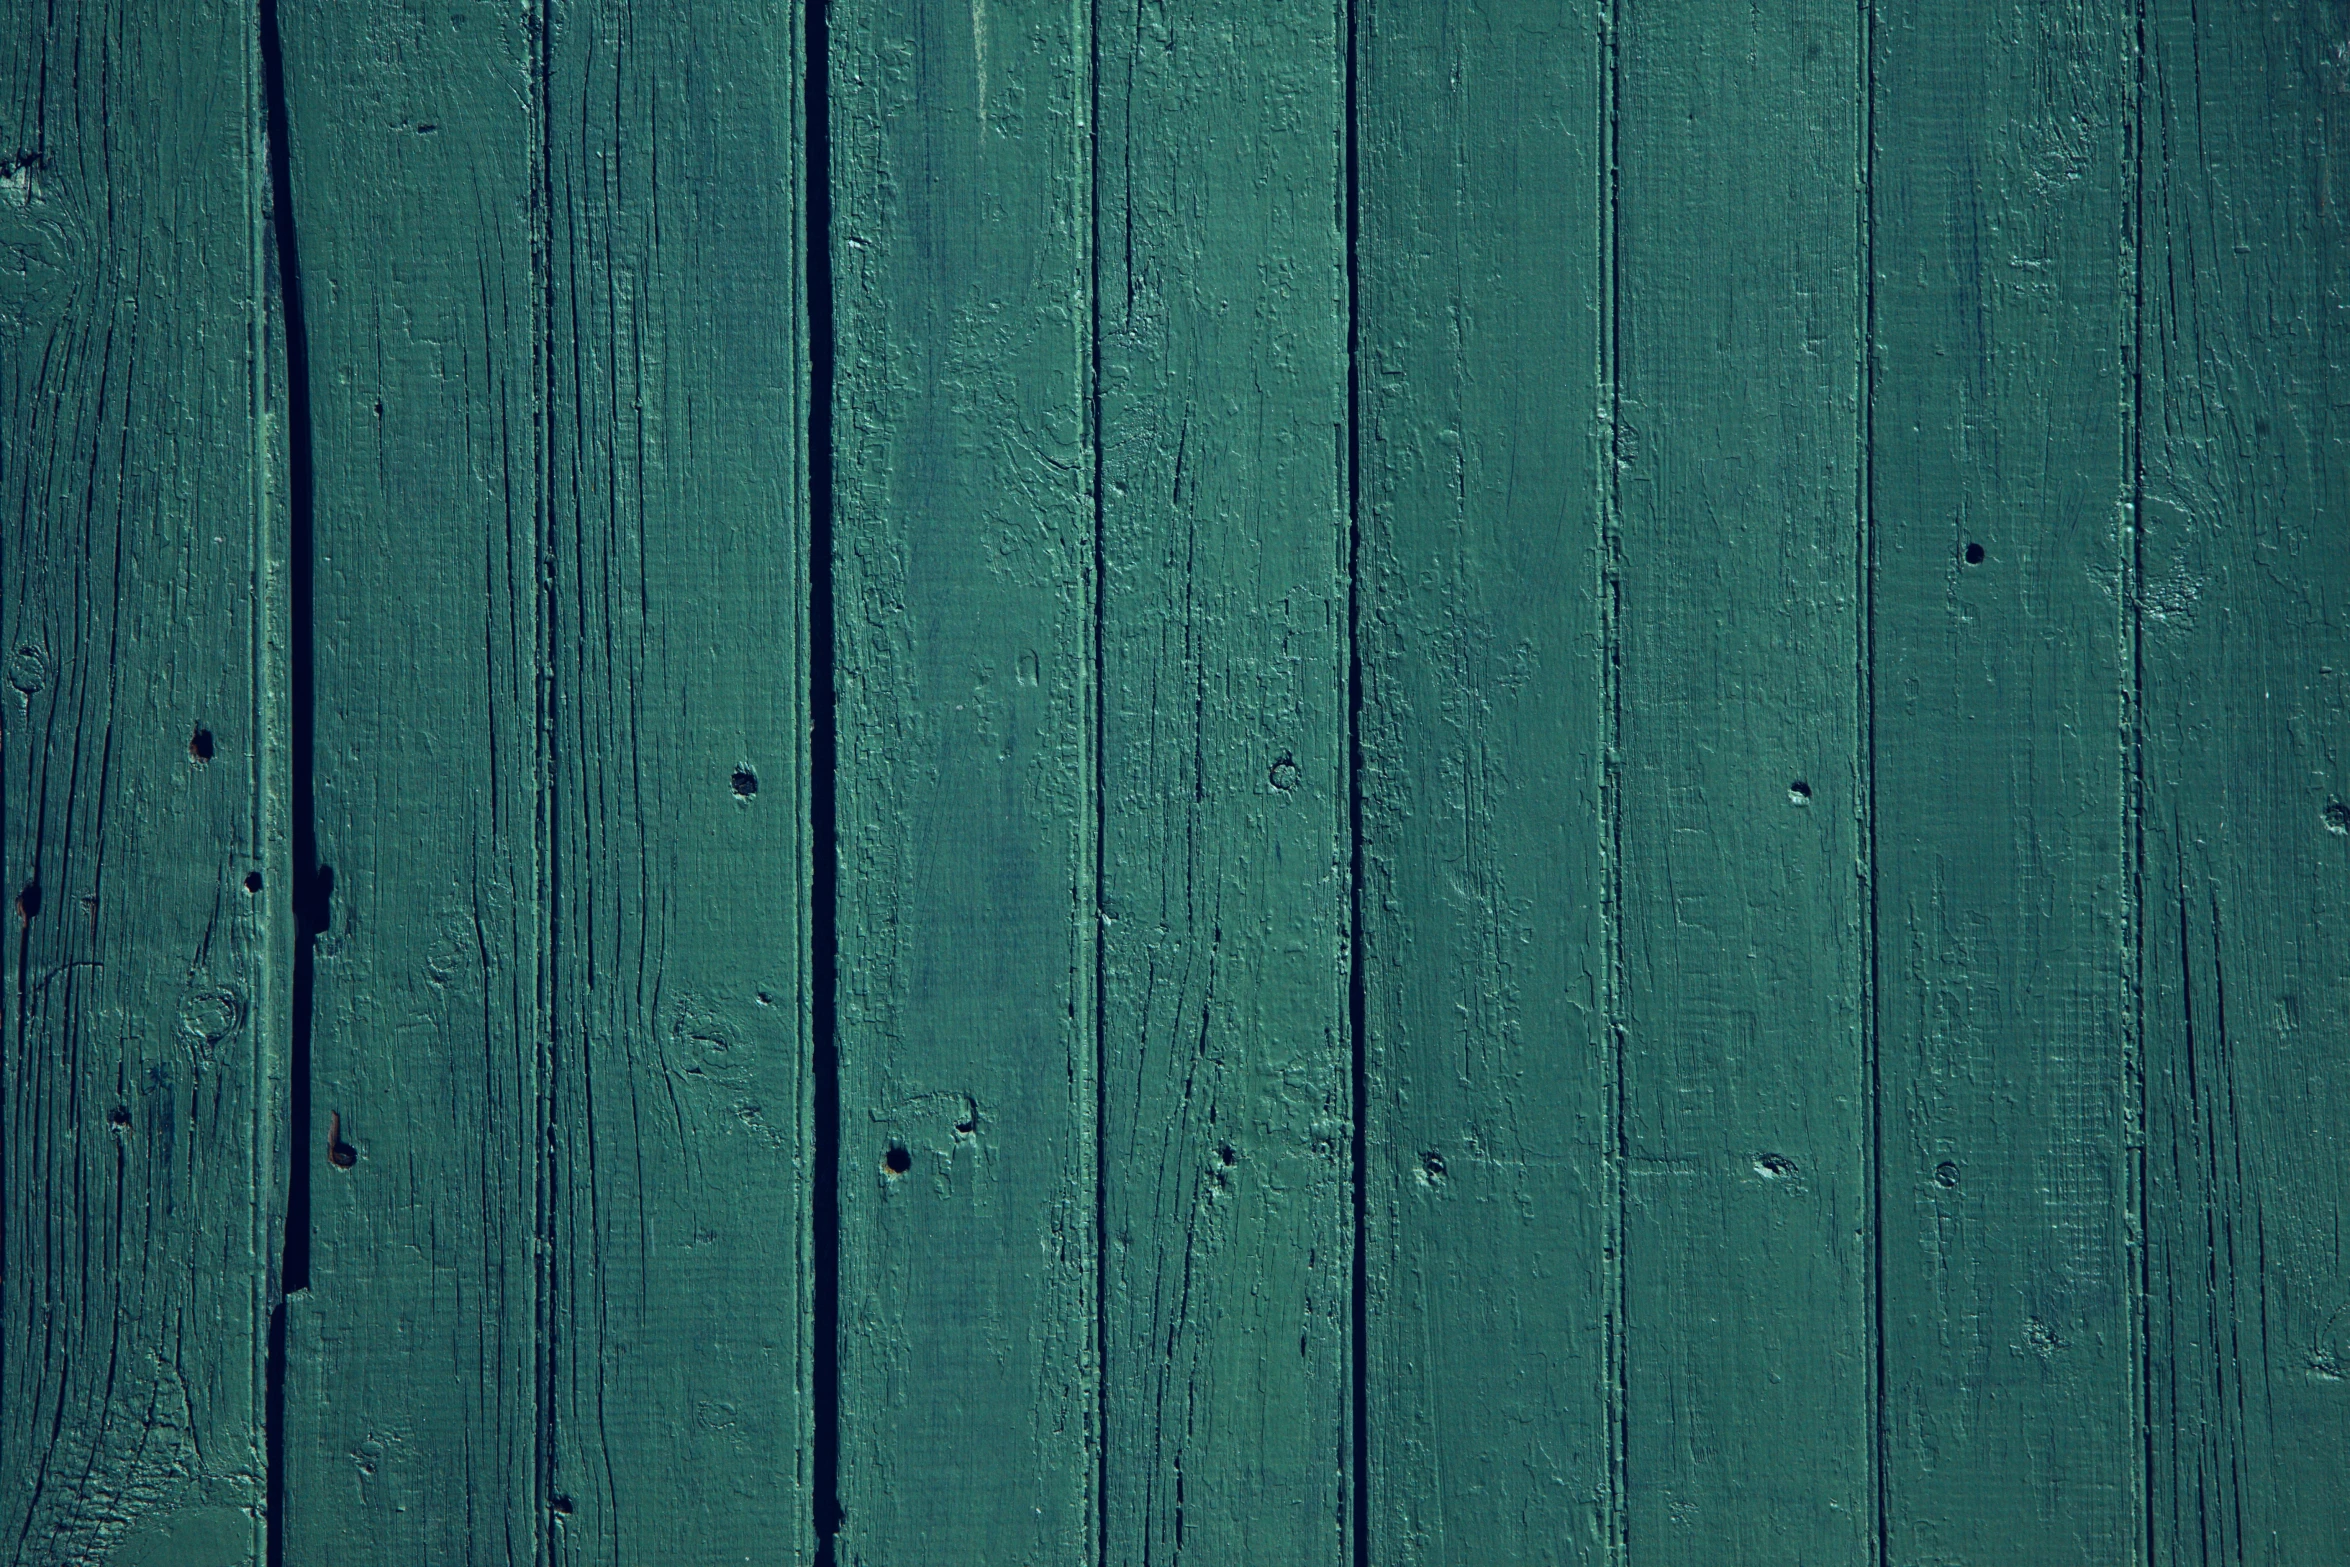 a dark green wood surface with planks or boards